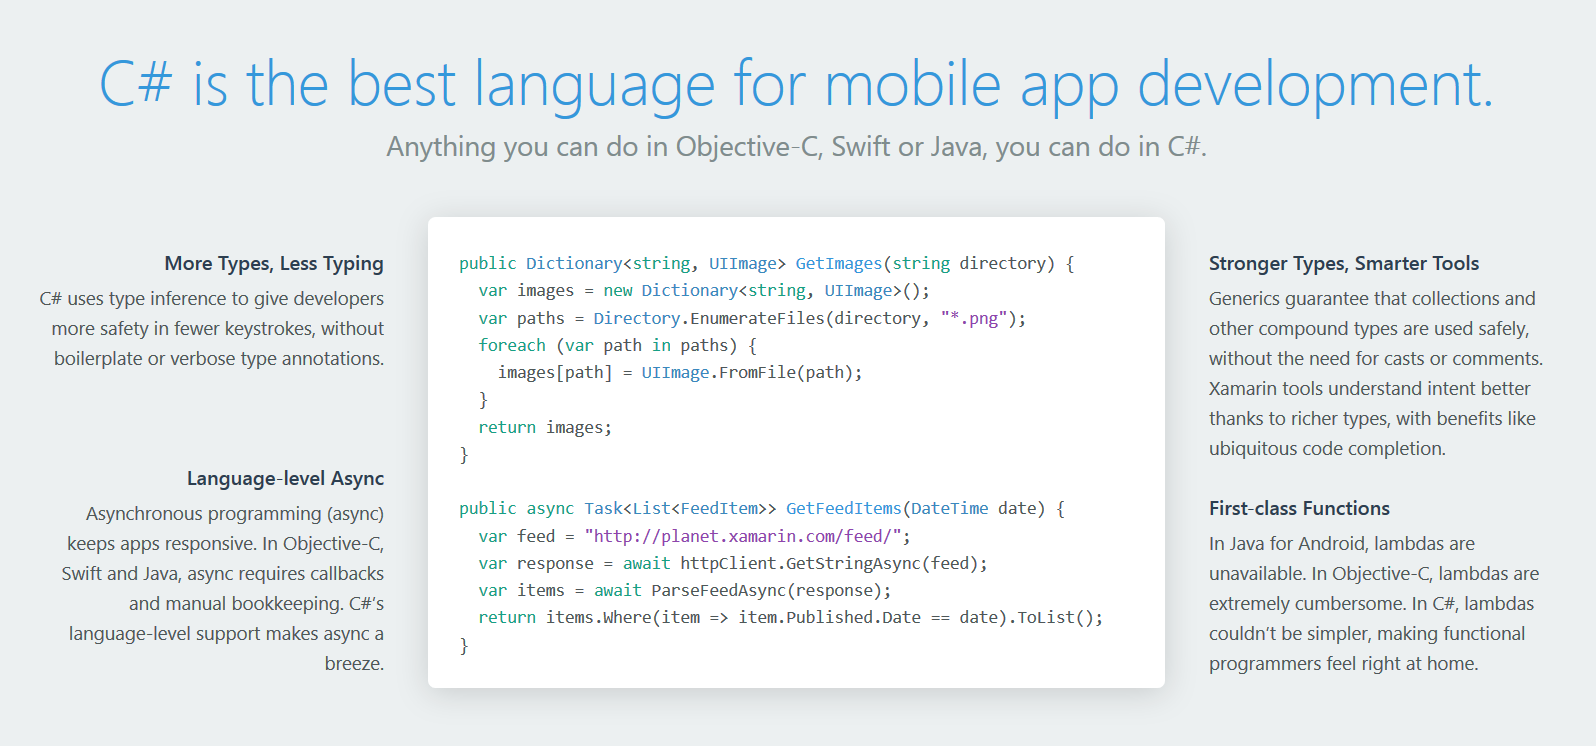 C# is a great choice for mobile developers